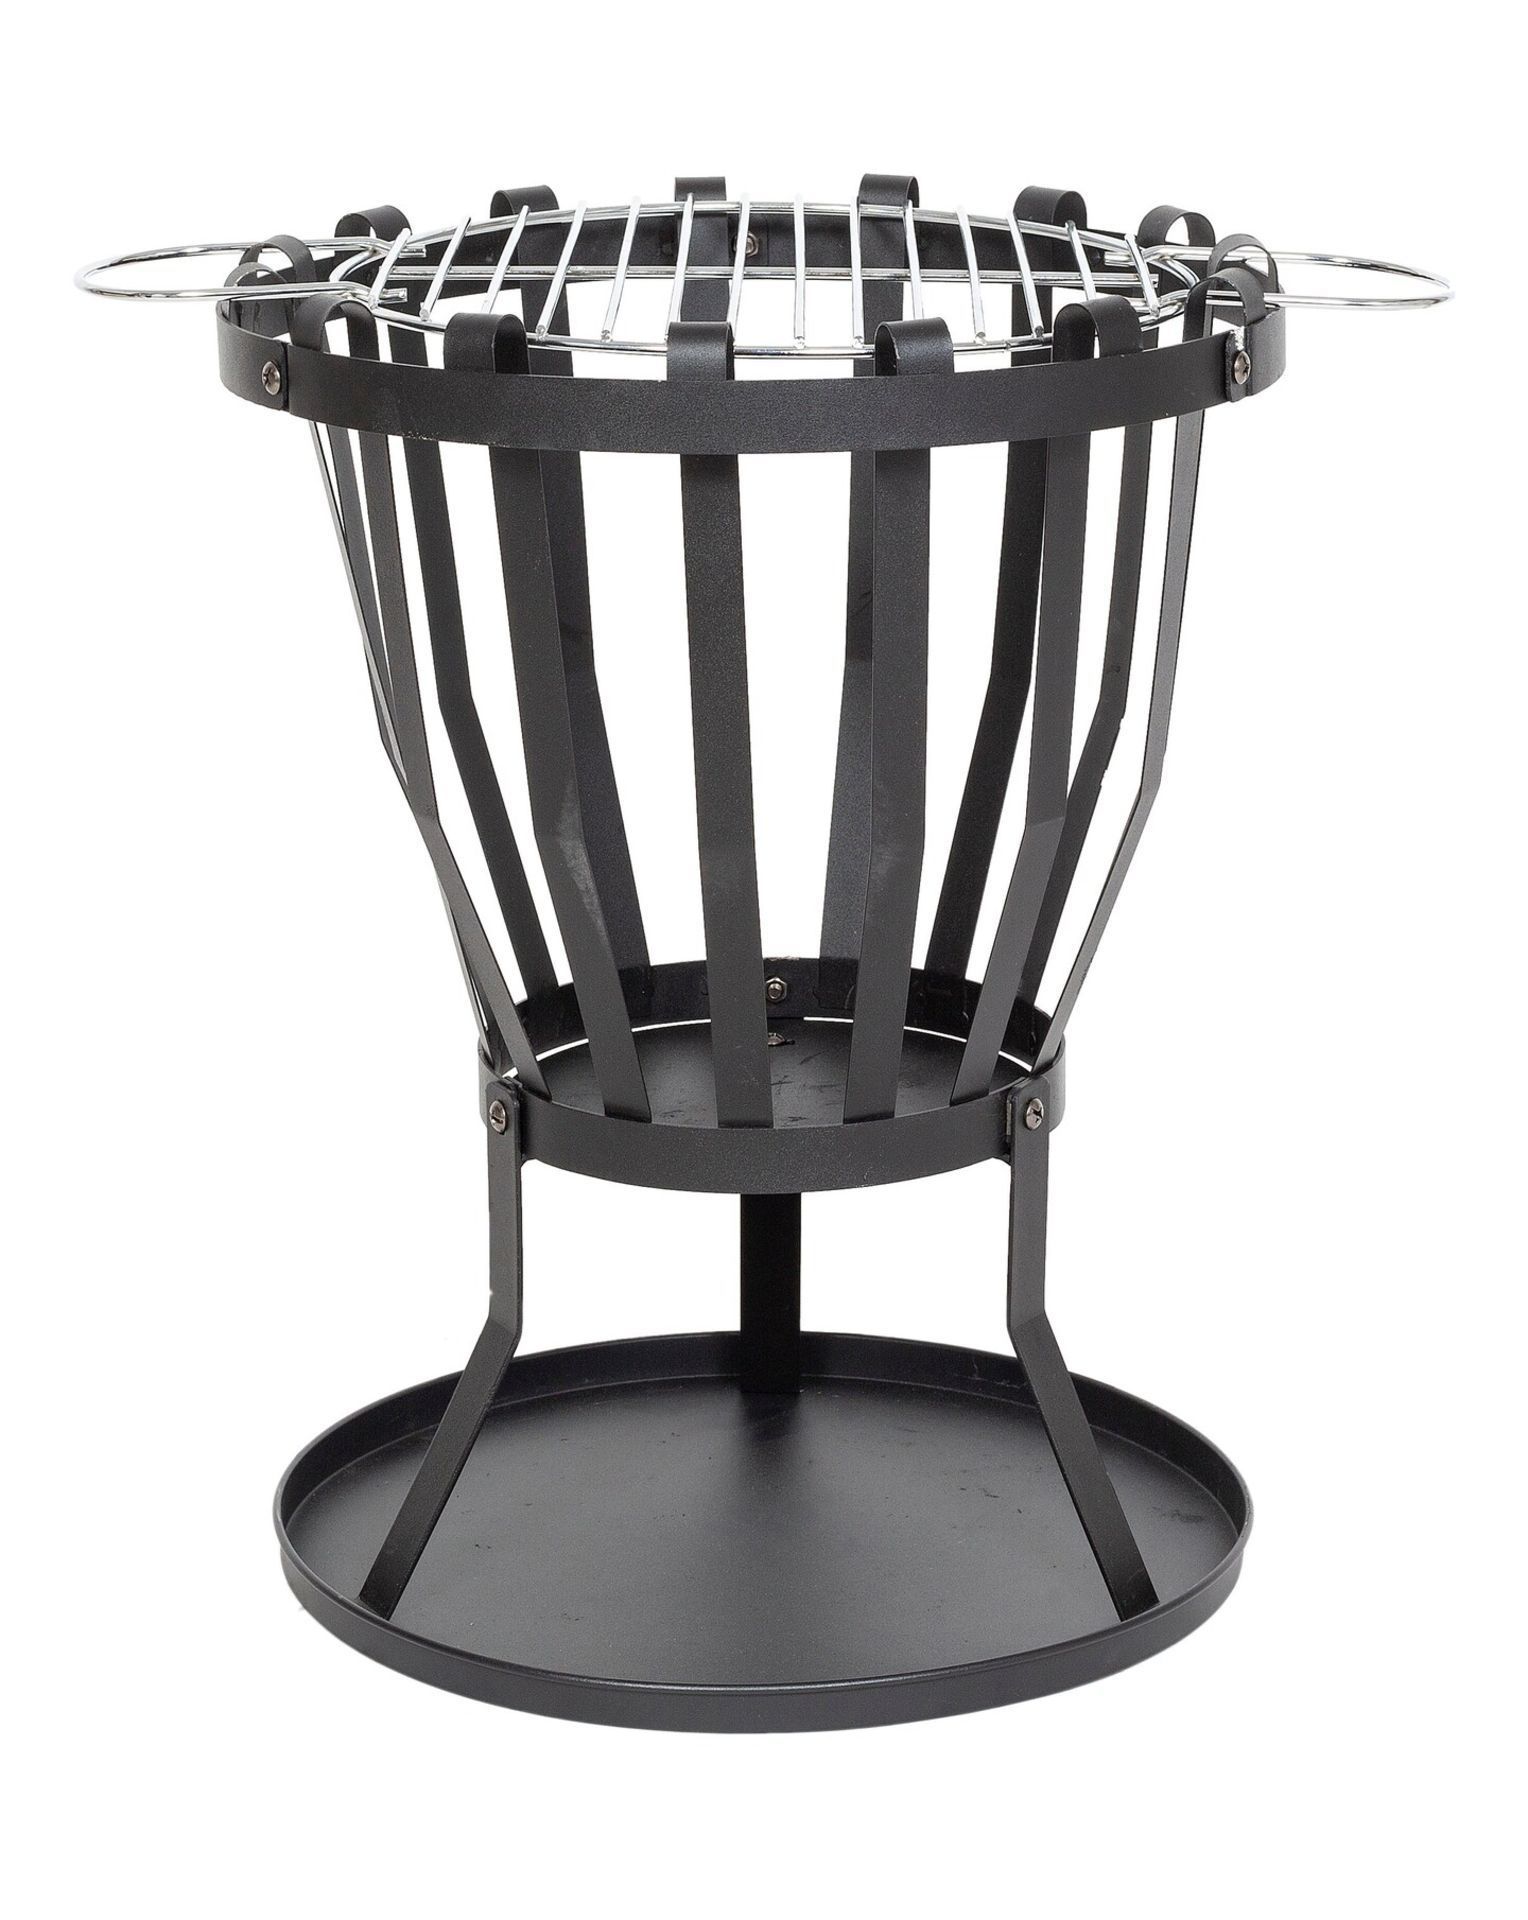 Trade Lot 10x NEW & BOXED LA HACIENDA Curitiba Fire Basket with Cooking Grill. RRP £55 EACH. The - Image 2 of 2